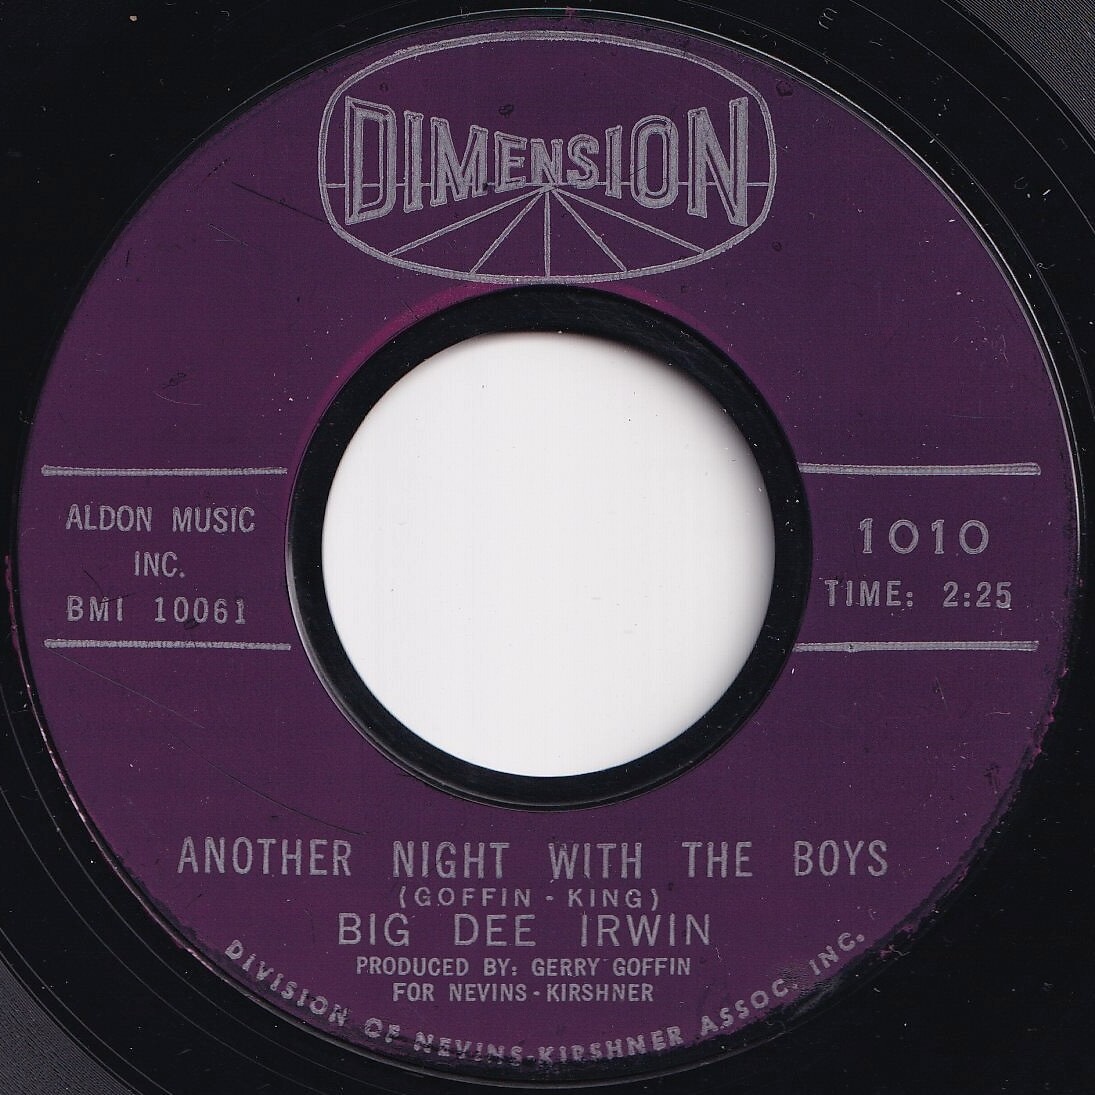 Big Dee Irwin Swinging On A Star / Another Night With The Boys Dimension US 1010 206193 R&B R&R レコード 7インチ 45_画像2